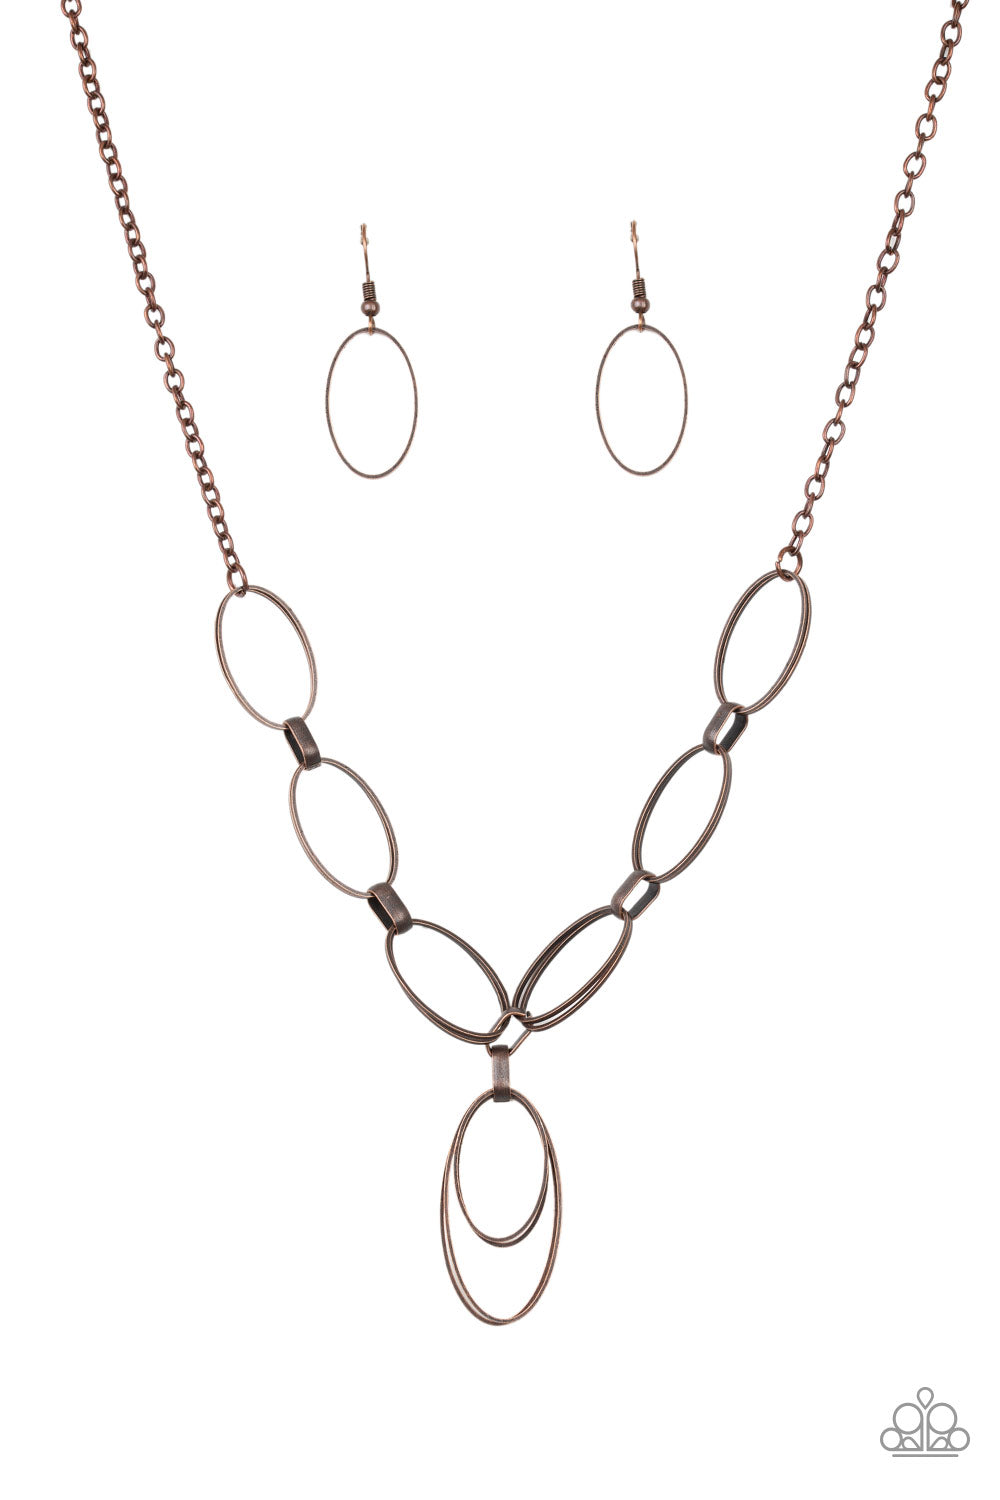 Paparazzi necklaces - All OVAL Town - Copper